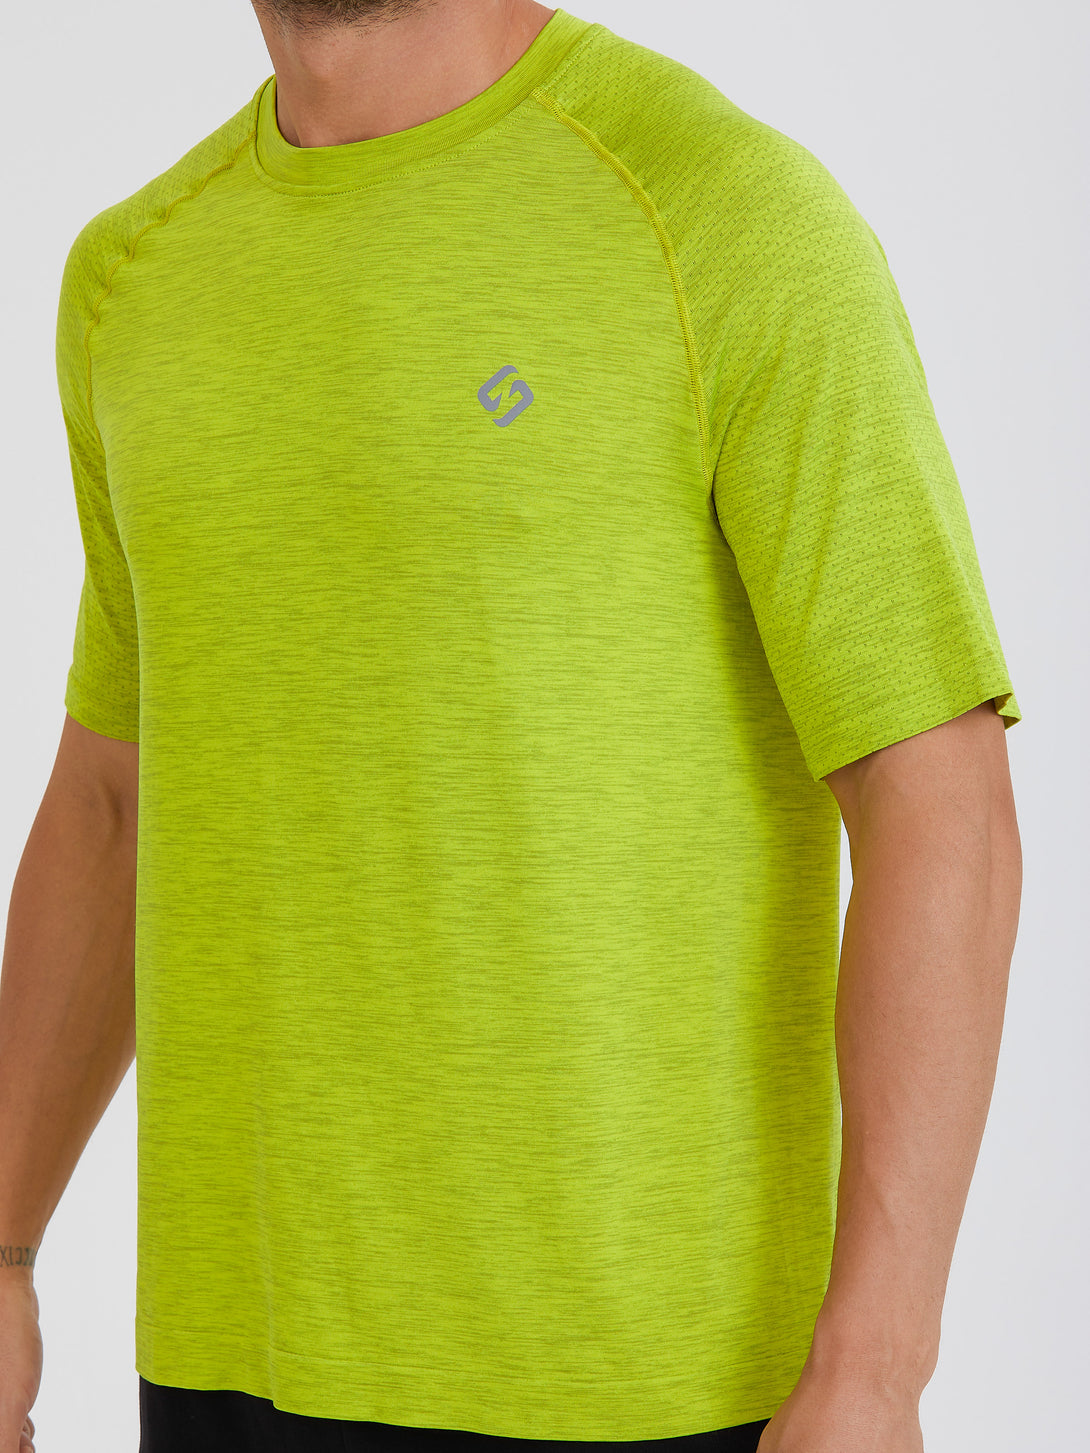 A Man Wearing Lime Color Seamless Workout Comfort T-Shirt